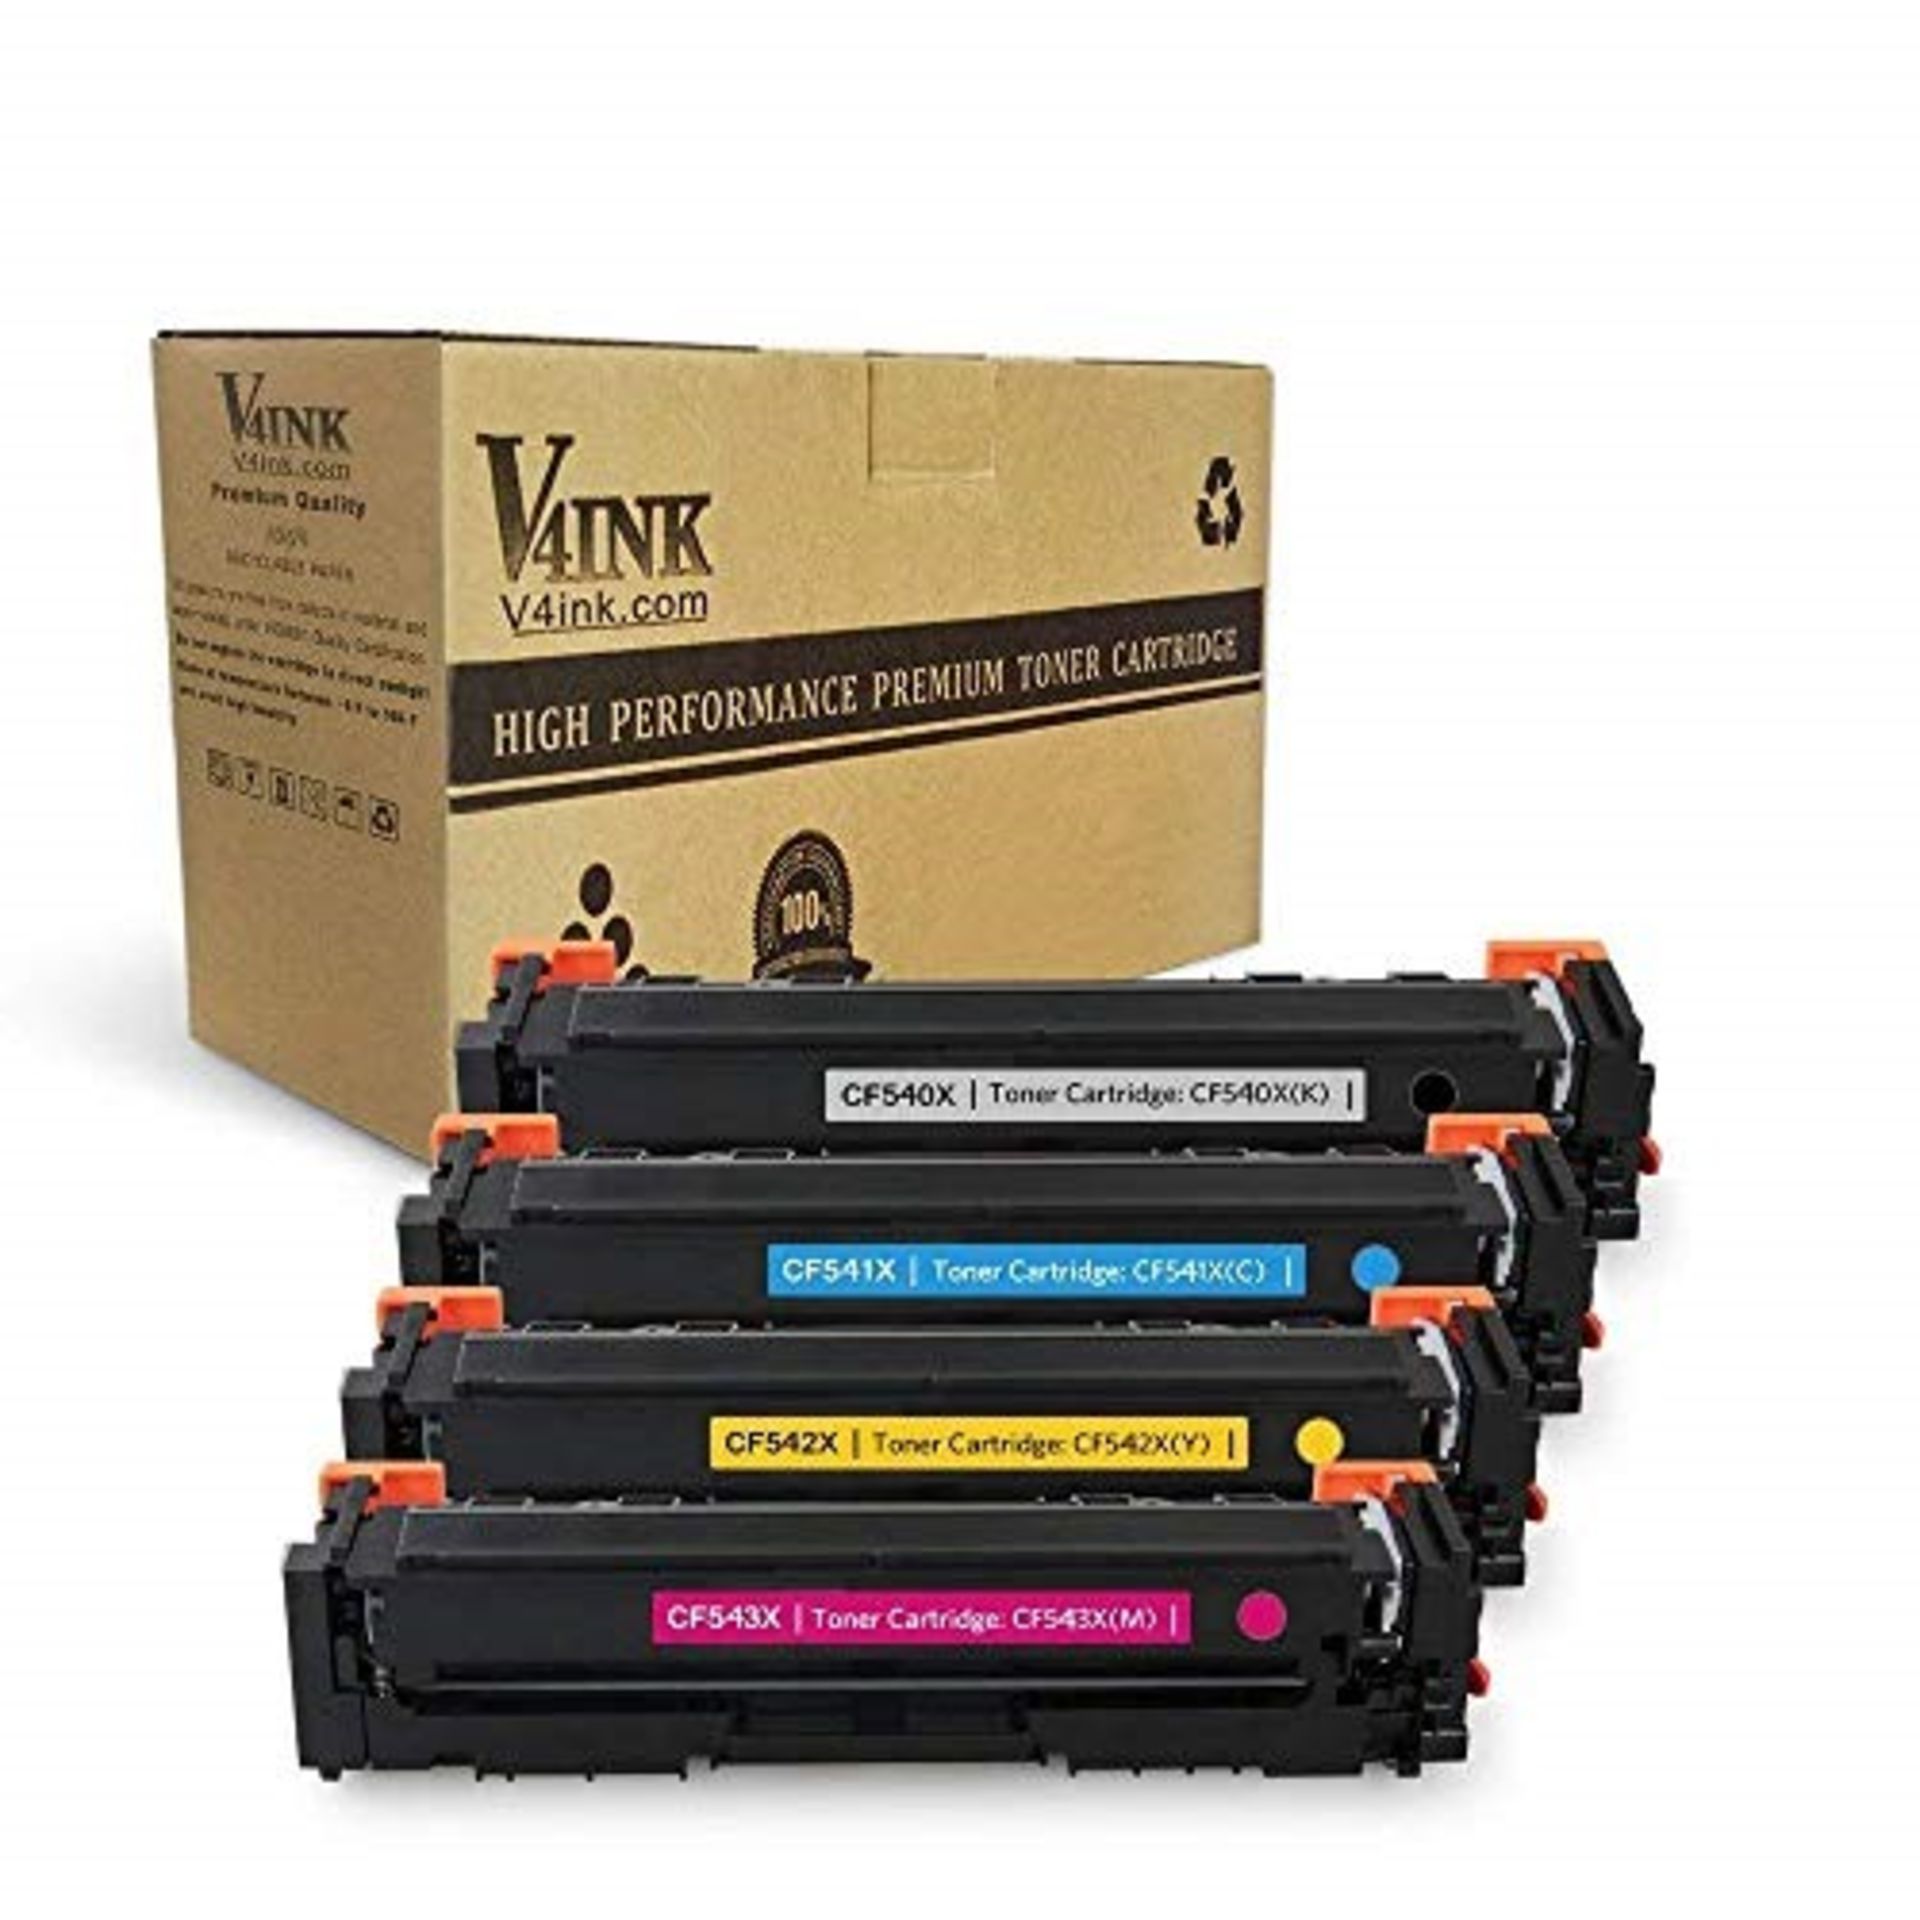 V4INK Compatible Toner Cartridge Replacement for HP 203X CF540X for use with HP Colour